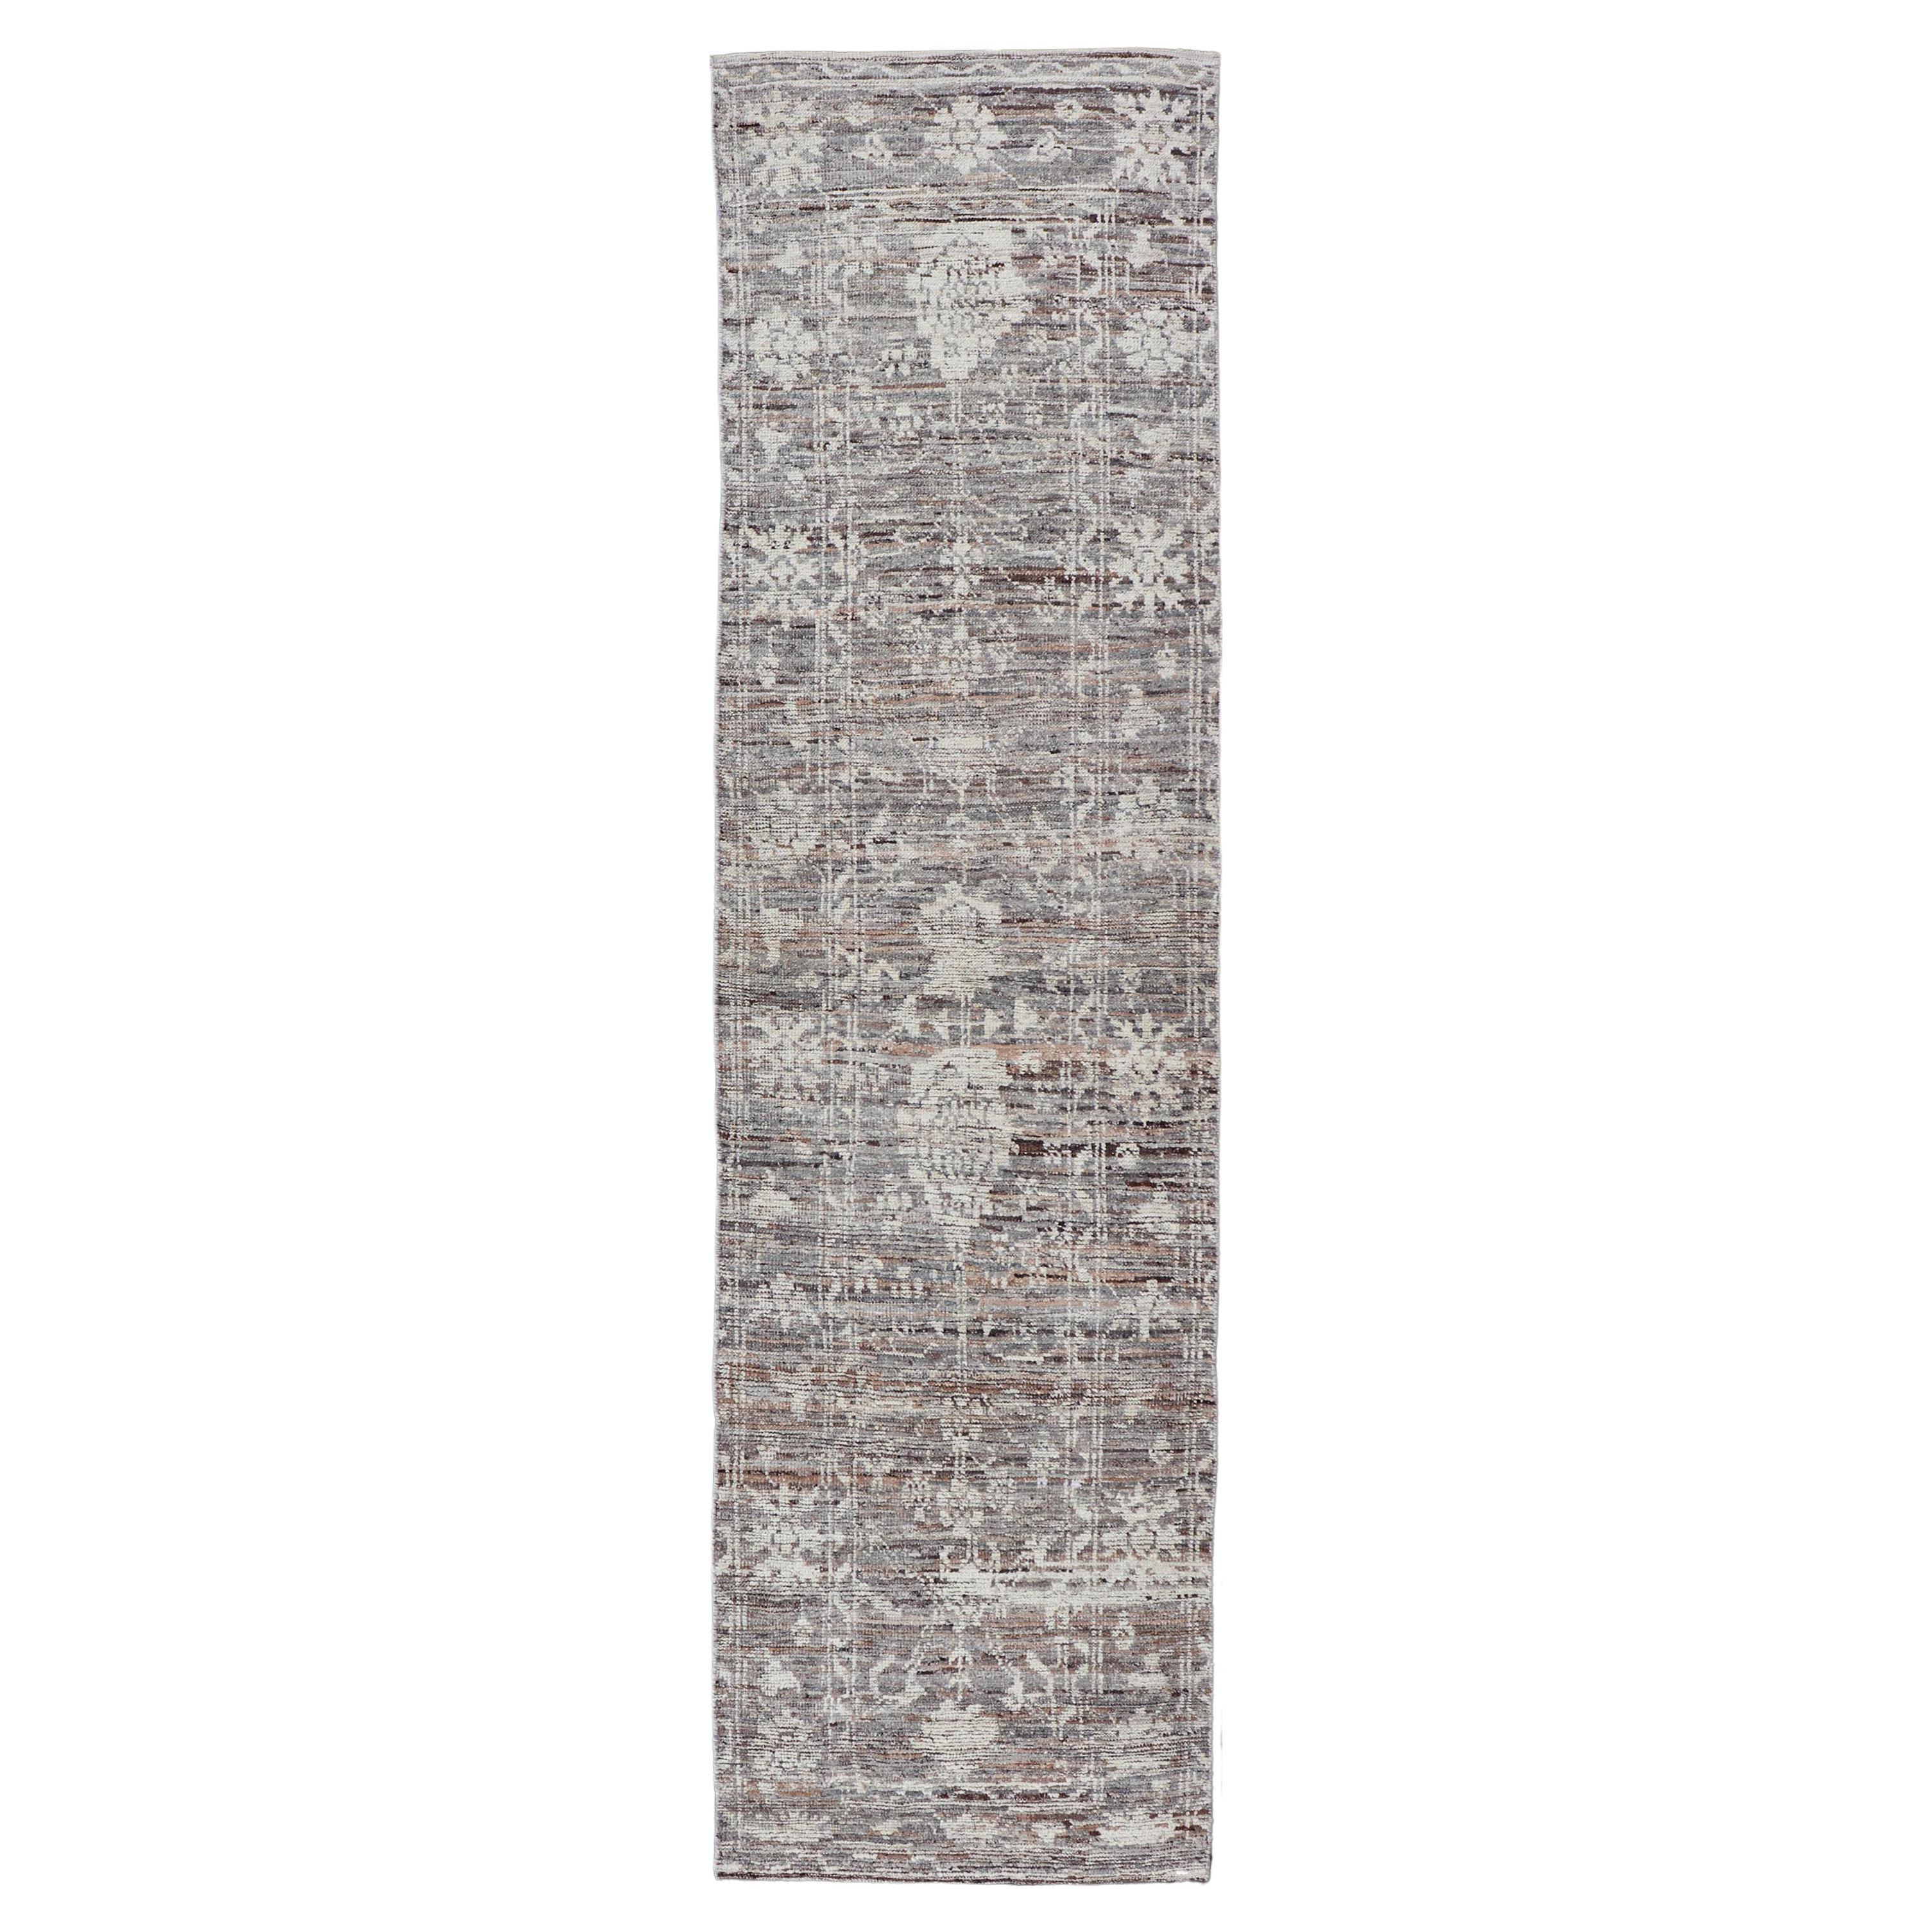 Modern Oushak Runner in Wool with Floral Design in Shades of Gray, Brown, Cream